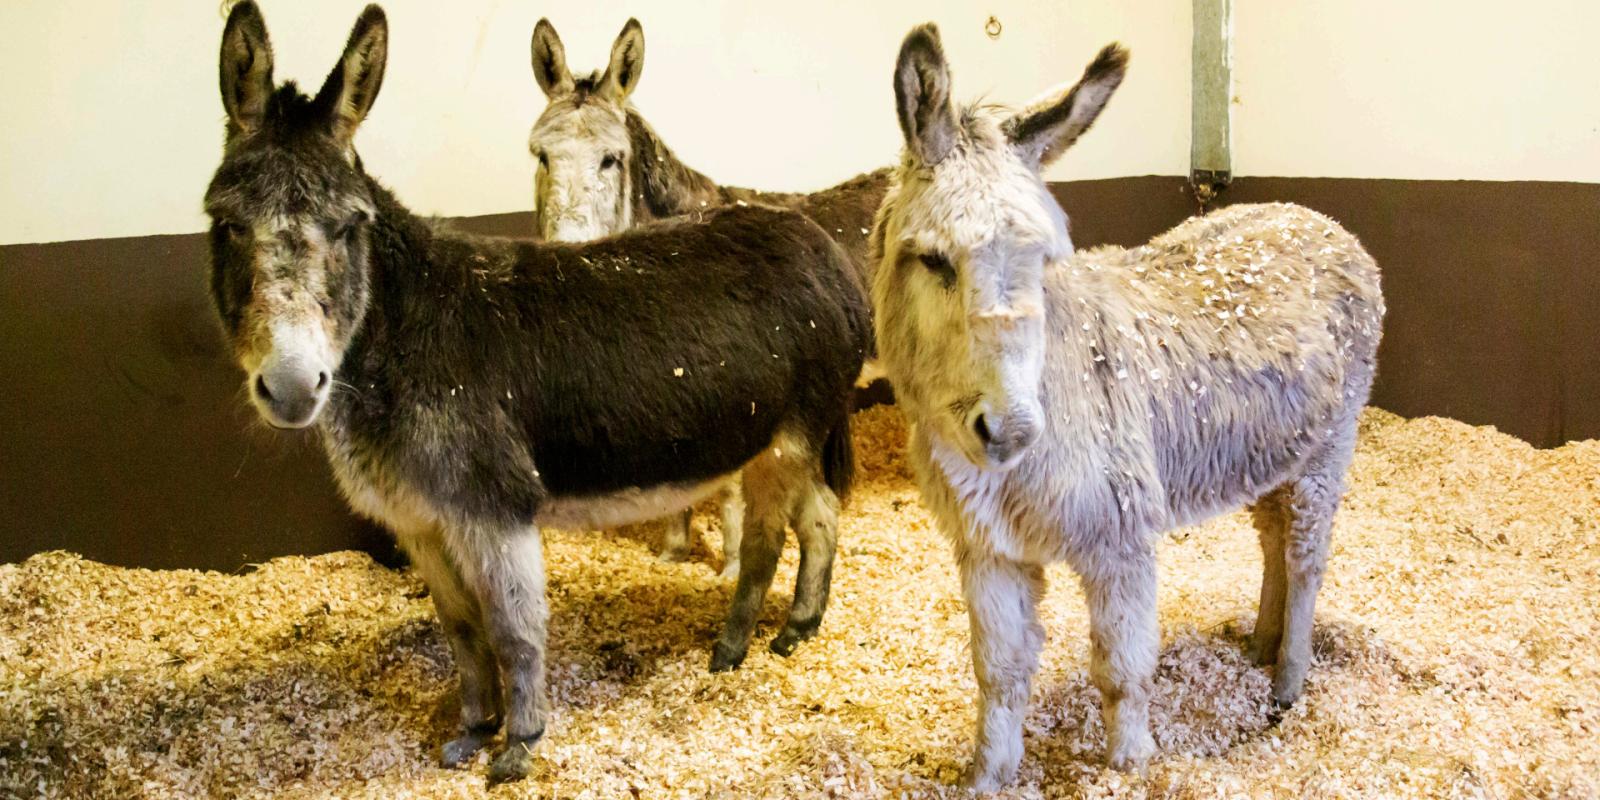 Three rescued donkeys standing in their stable